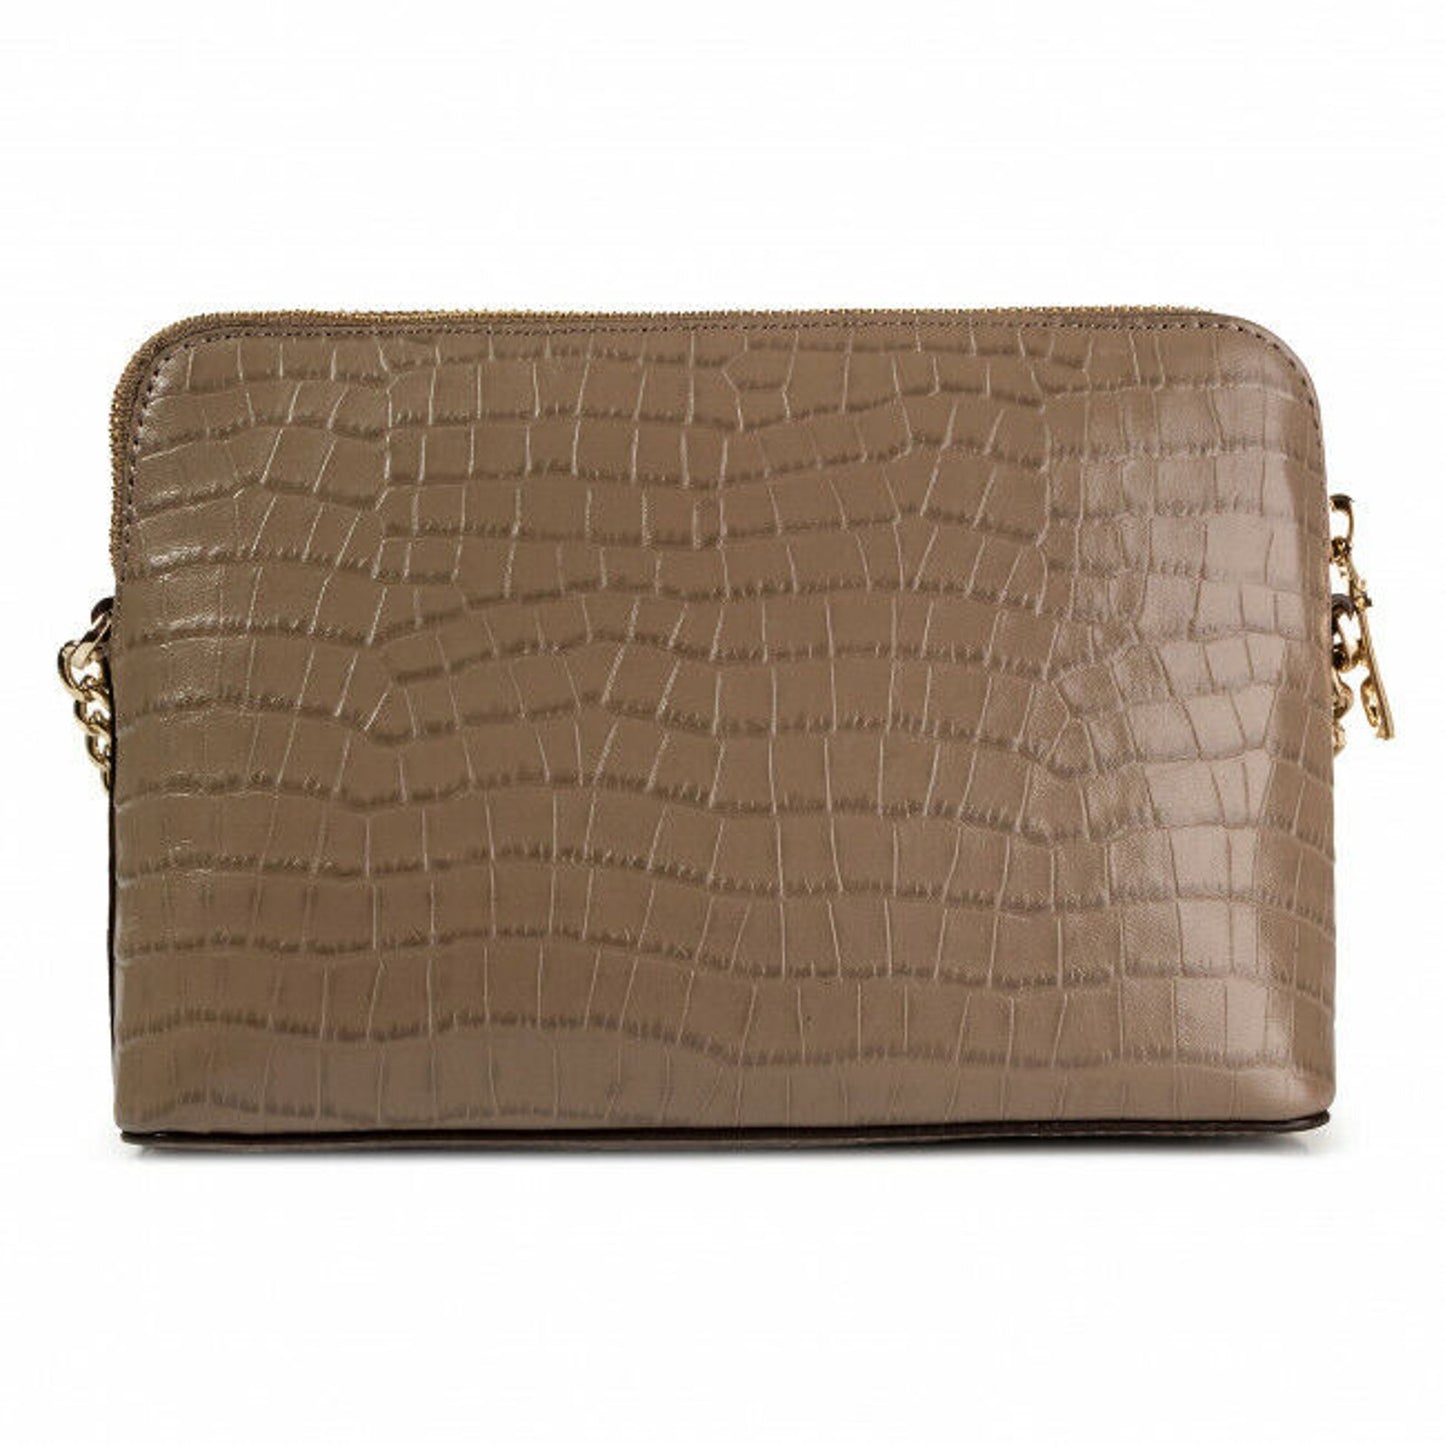 DKNY BRYANT DOME ICONIC CROSSBODY, EMBOSSED DUNE LEATHER, NWT $175